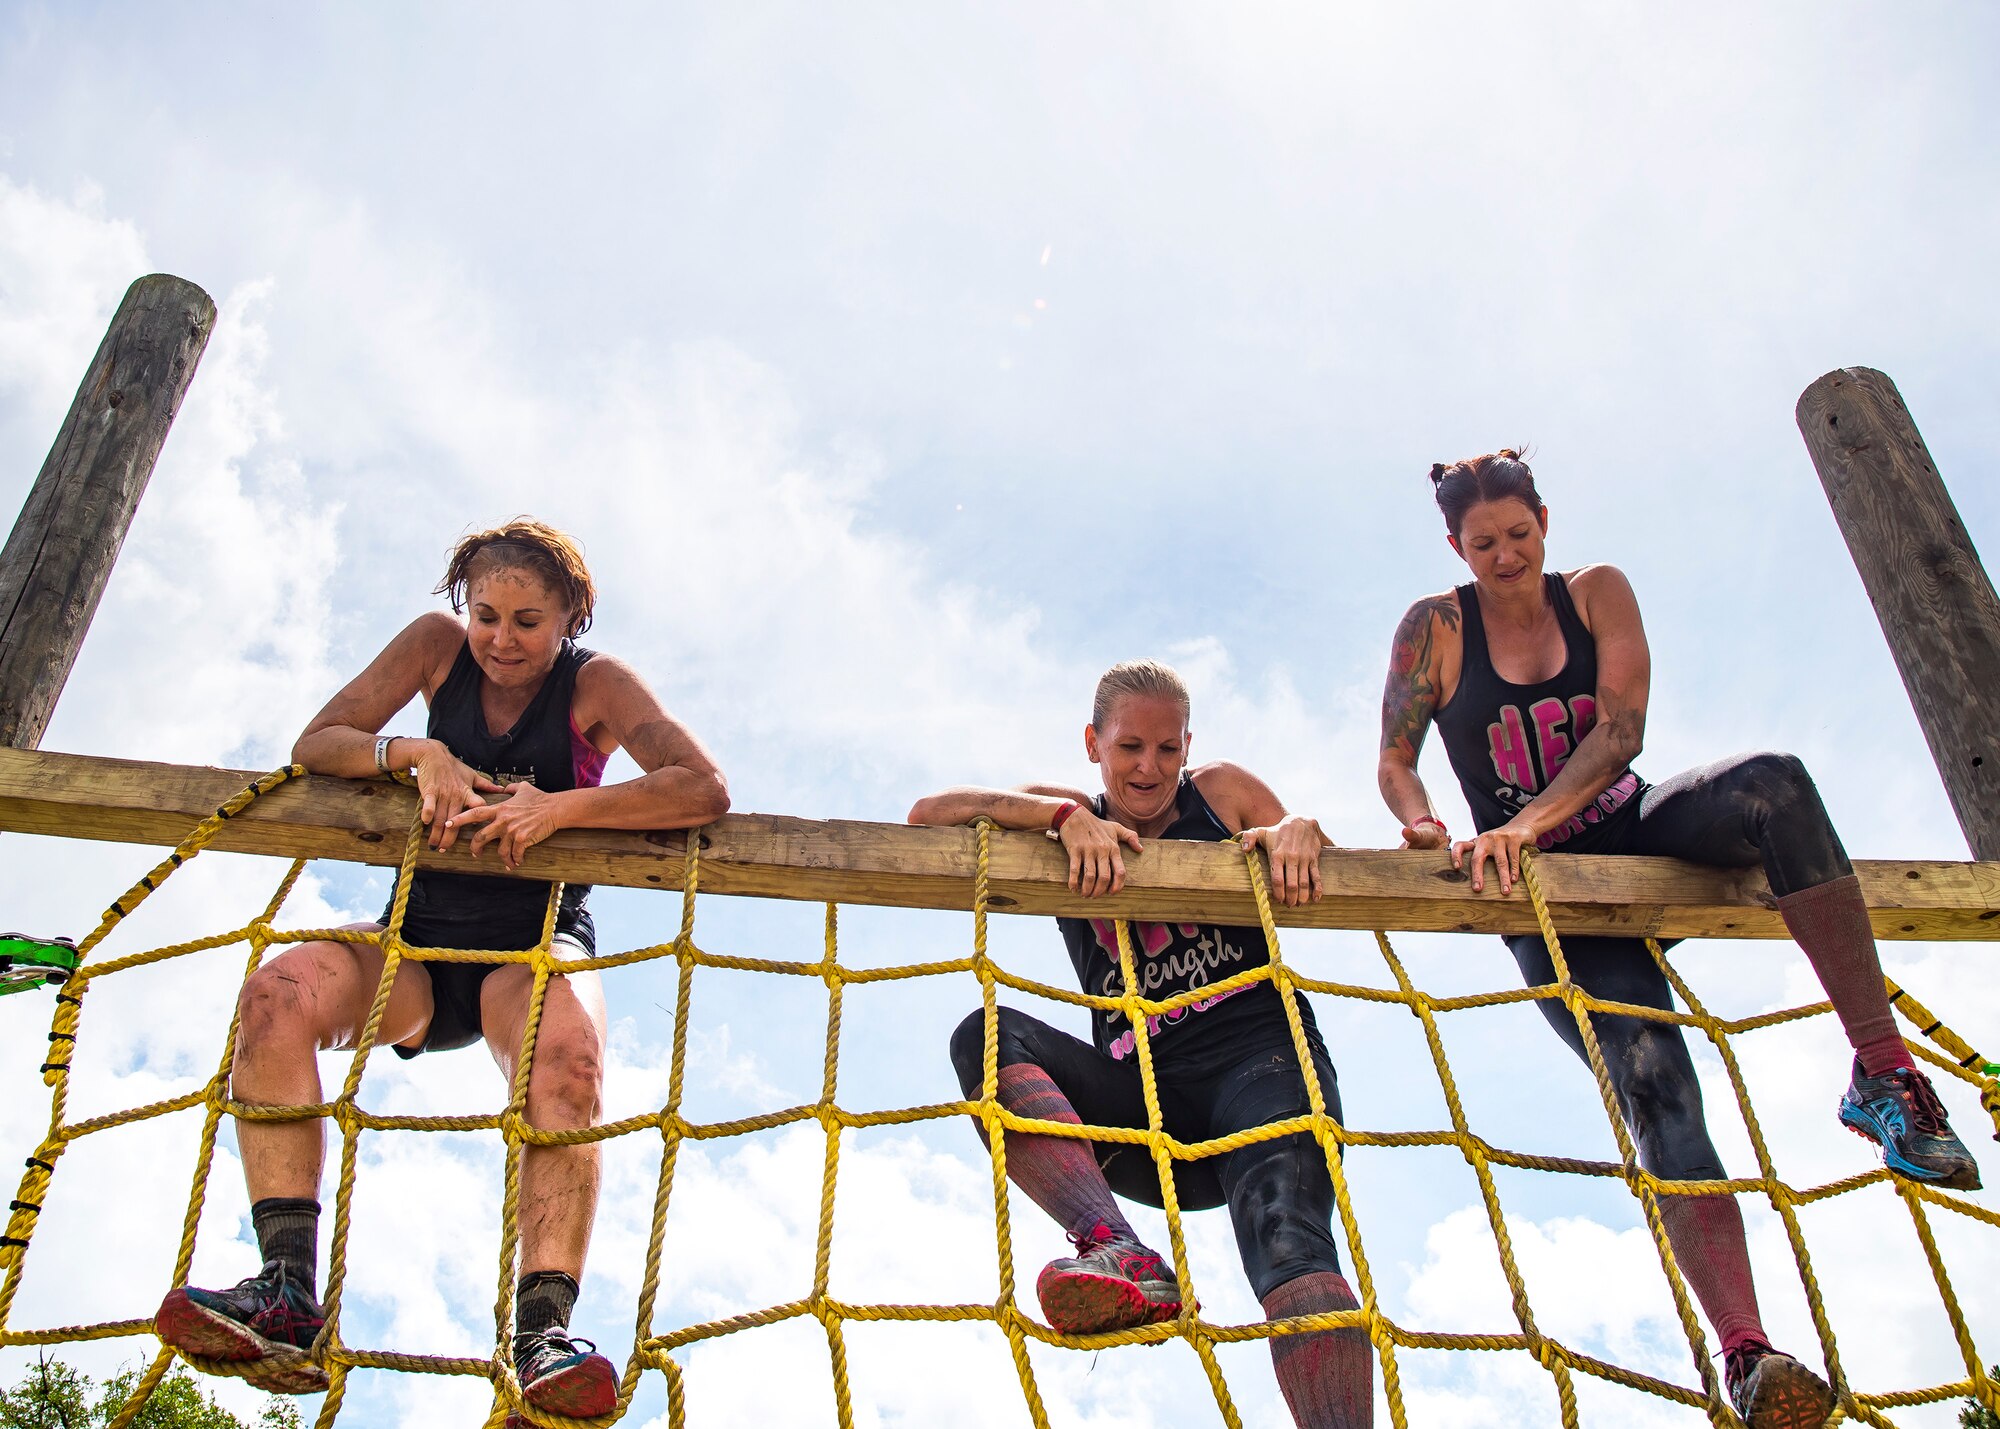 Moody Mud Run participants climb a rope obstacle, May 4, 2019, in Ray City, Ga. The sixth annual Mud Run had approximately 850 participants who had to overcome a series of obstacles on the 4 and 5-mile courses. The 32-obstacle course gave Airmen, families and the local community an opportunity to build camaraderie and teamwork skills. (U.S. Air Force photo by Airman 1st Class Eugene Oliver)